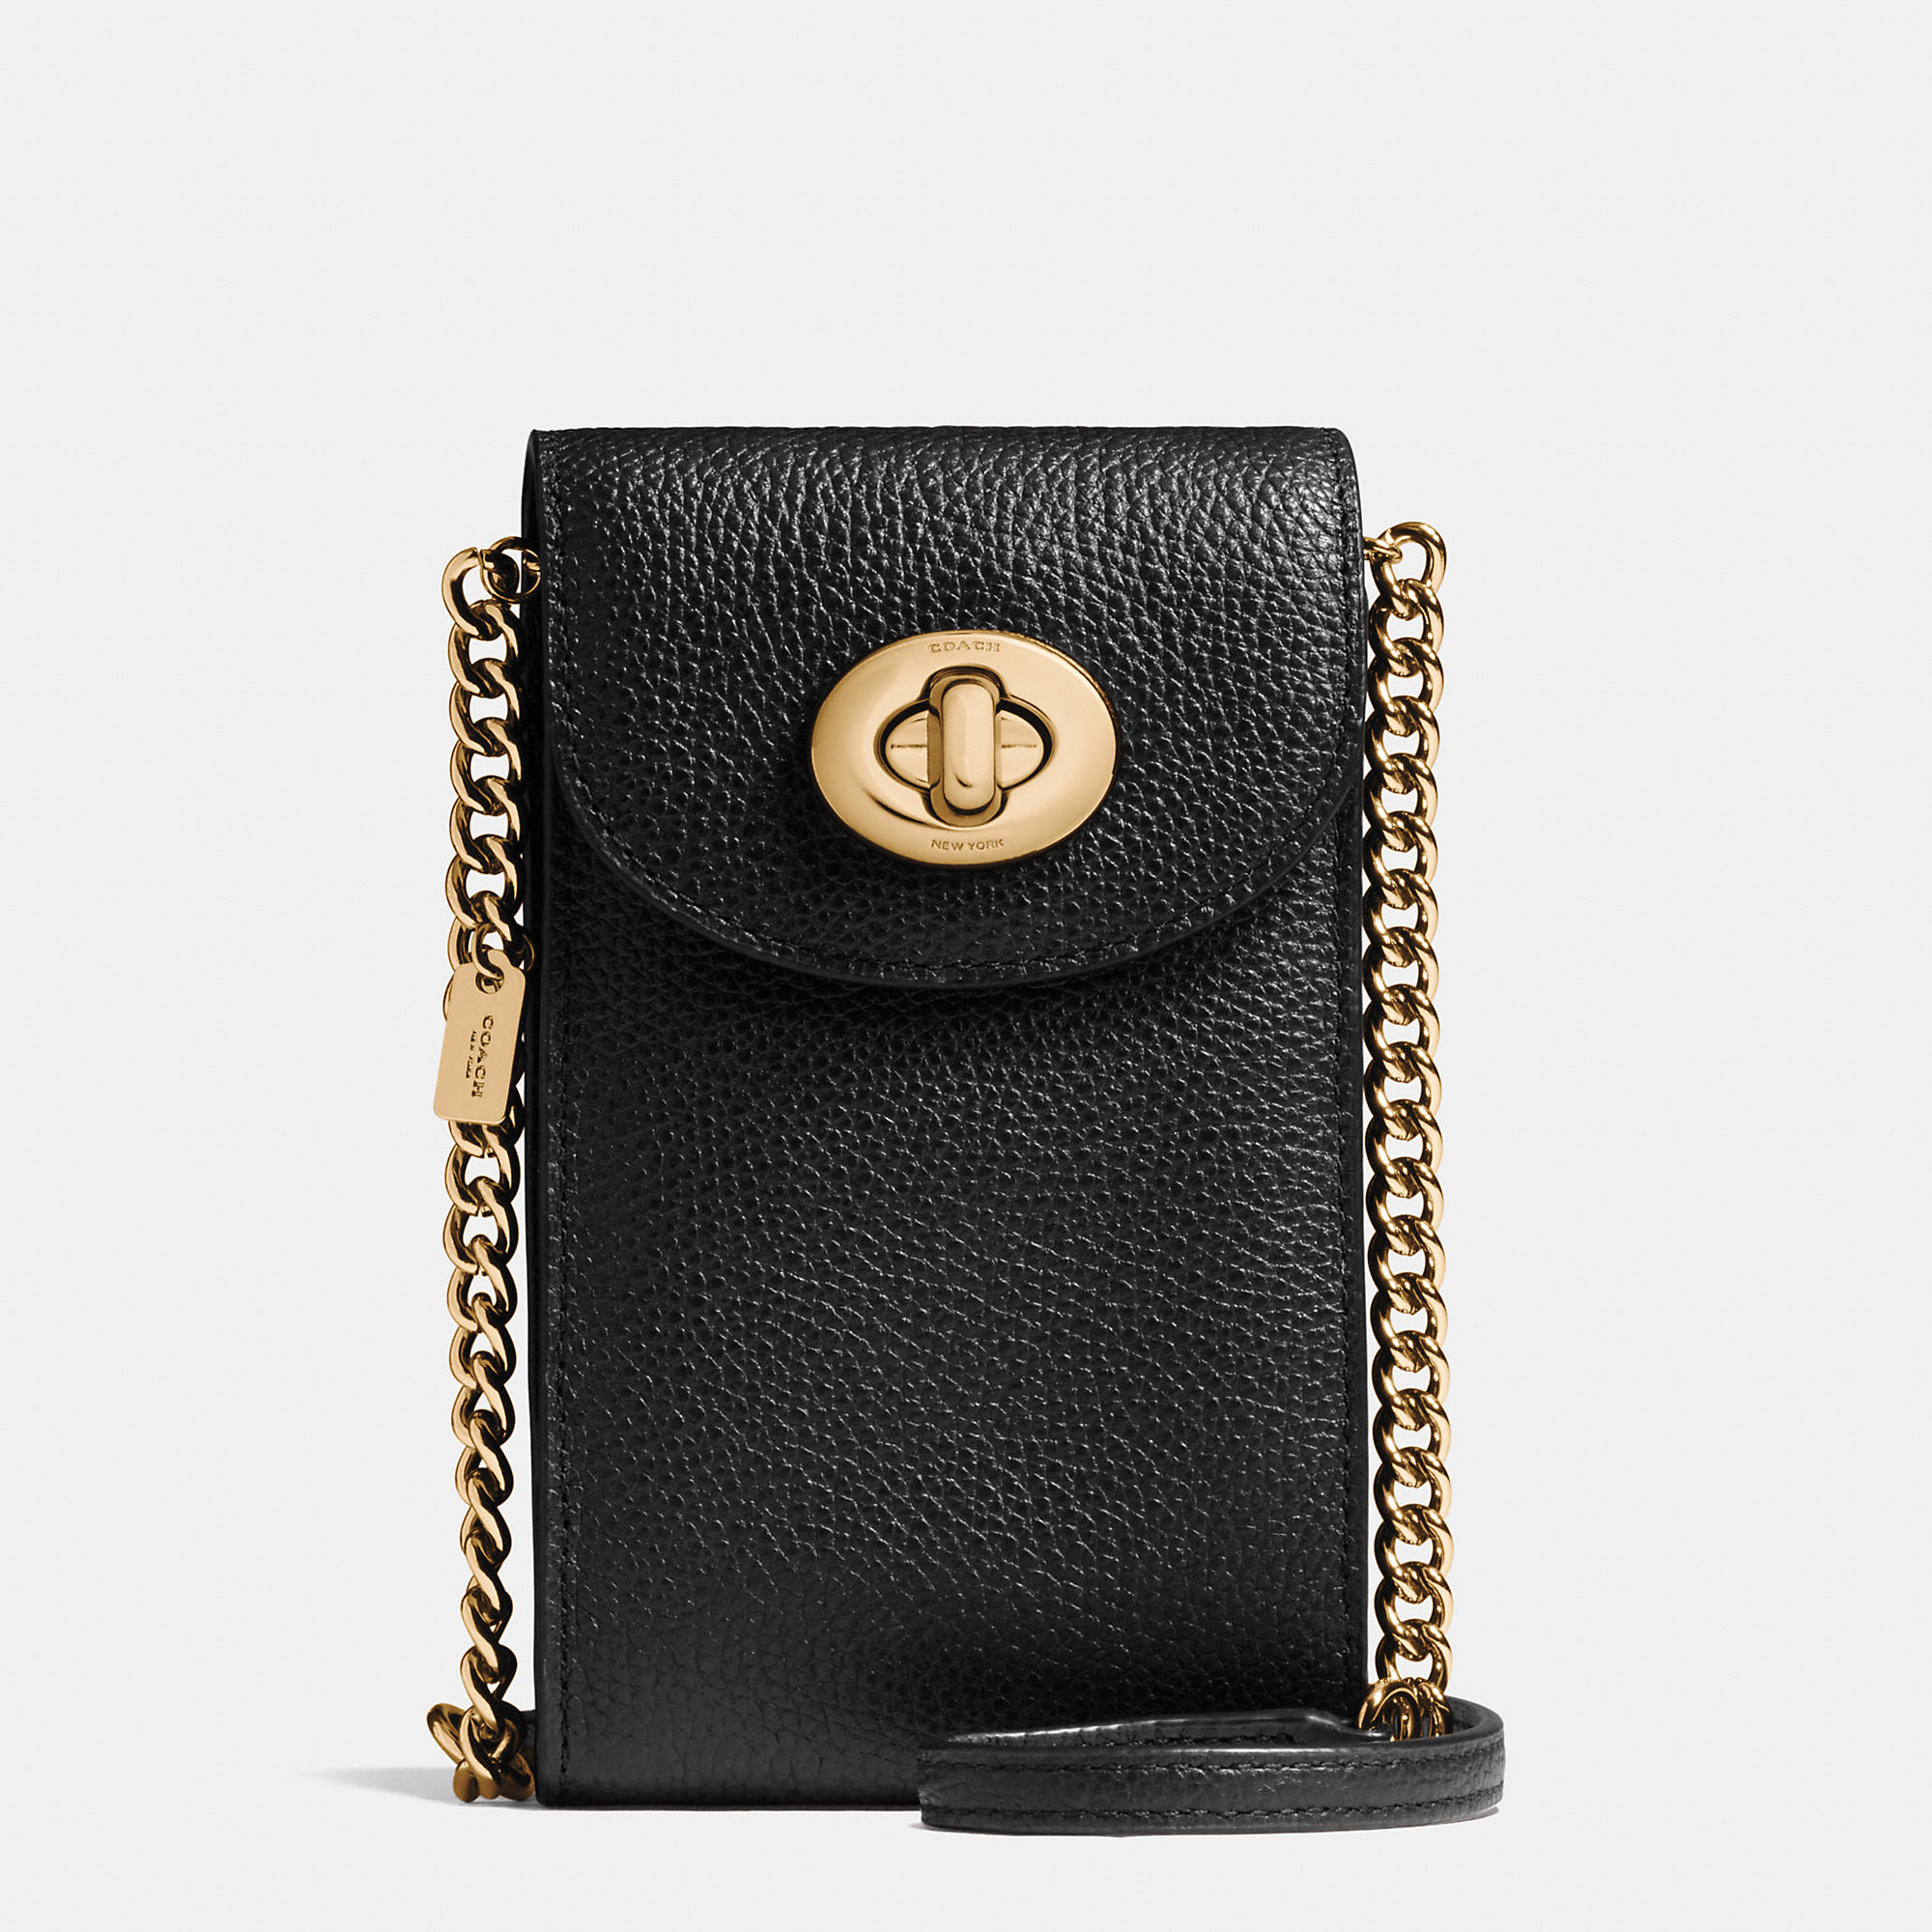 COACH Cell-Holder Pebbled-Leather Cross-Body Bag in Light Gold/Black (Black) - Lyst